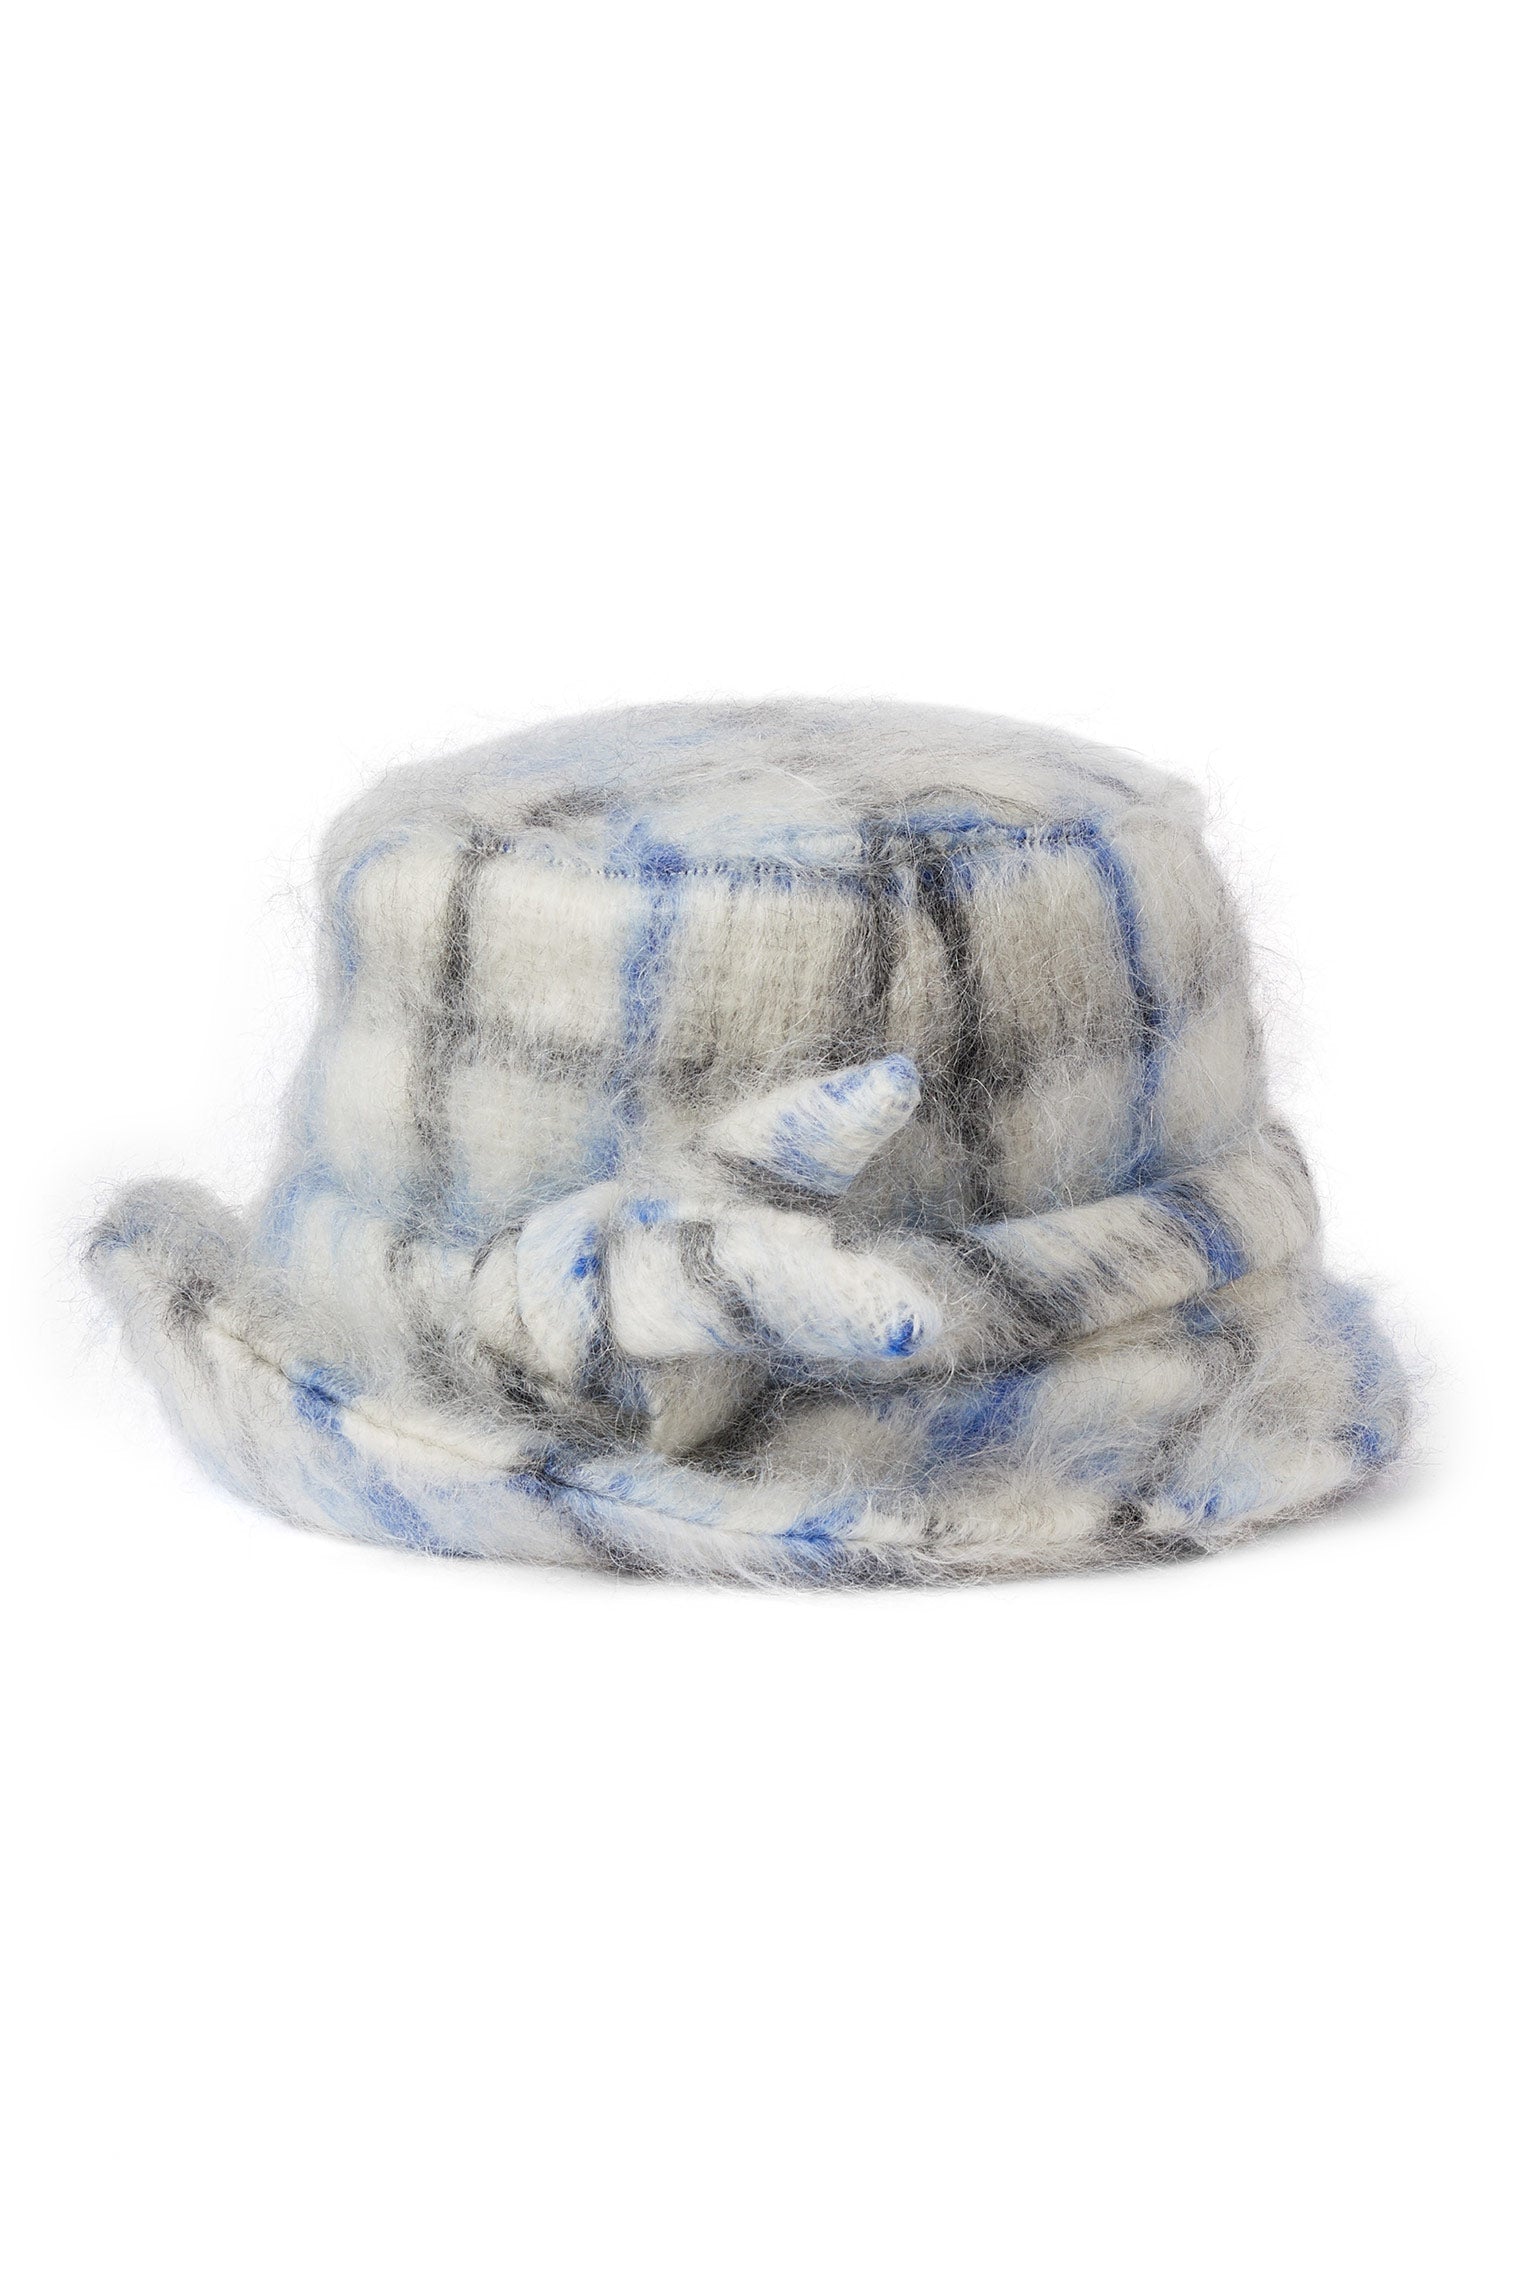 Dolores White Check Cloche - Products - Lock & Co. Hatters London UK